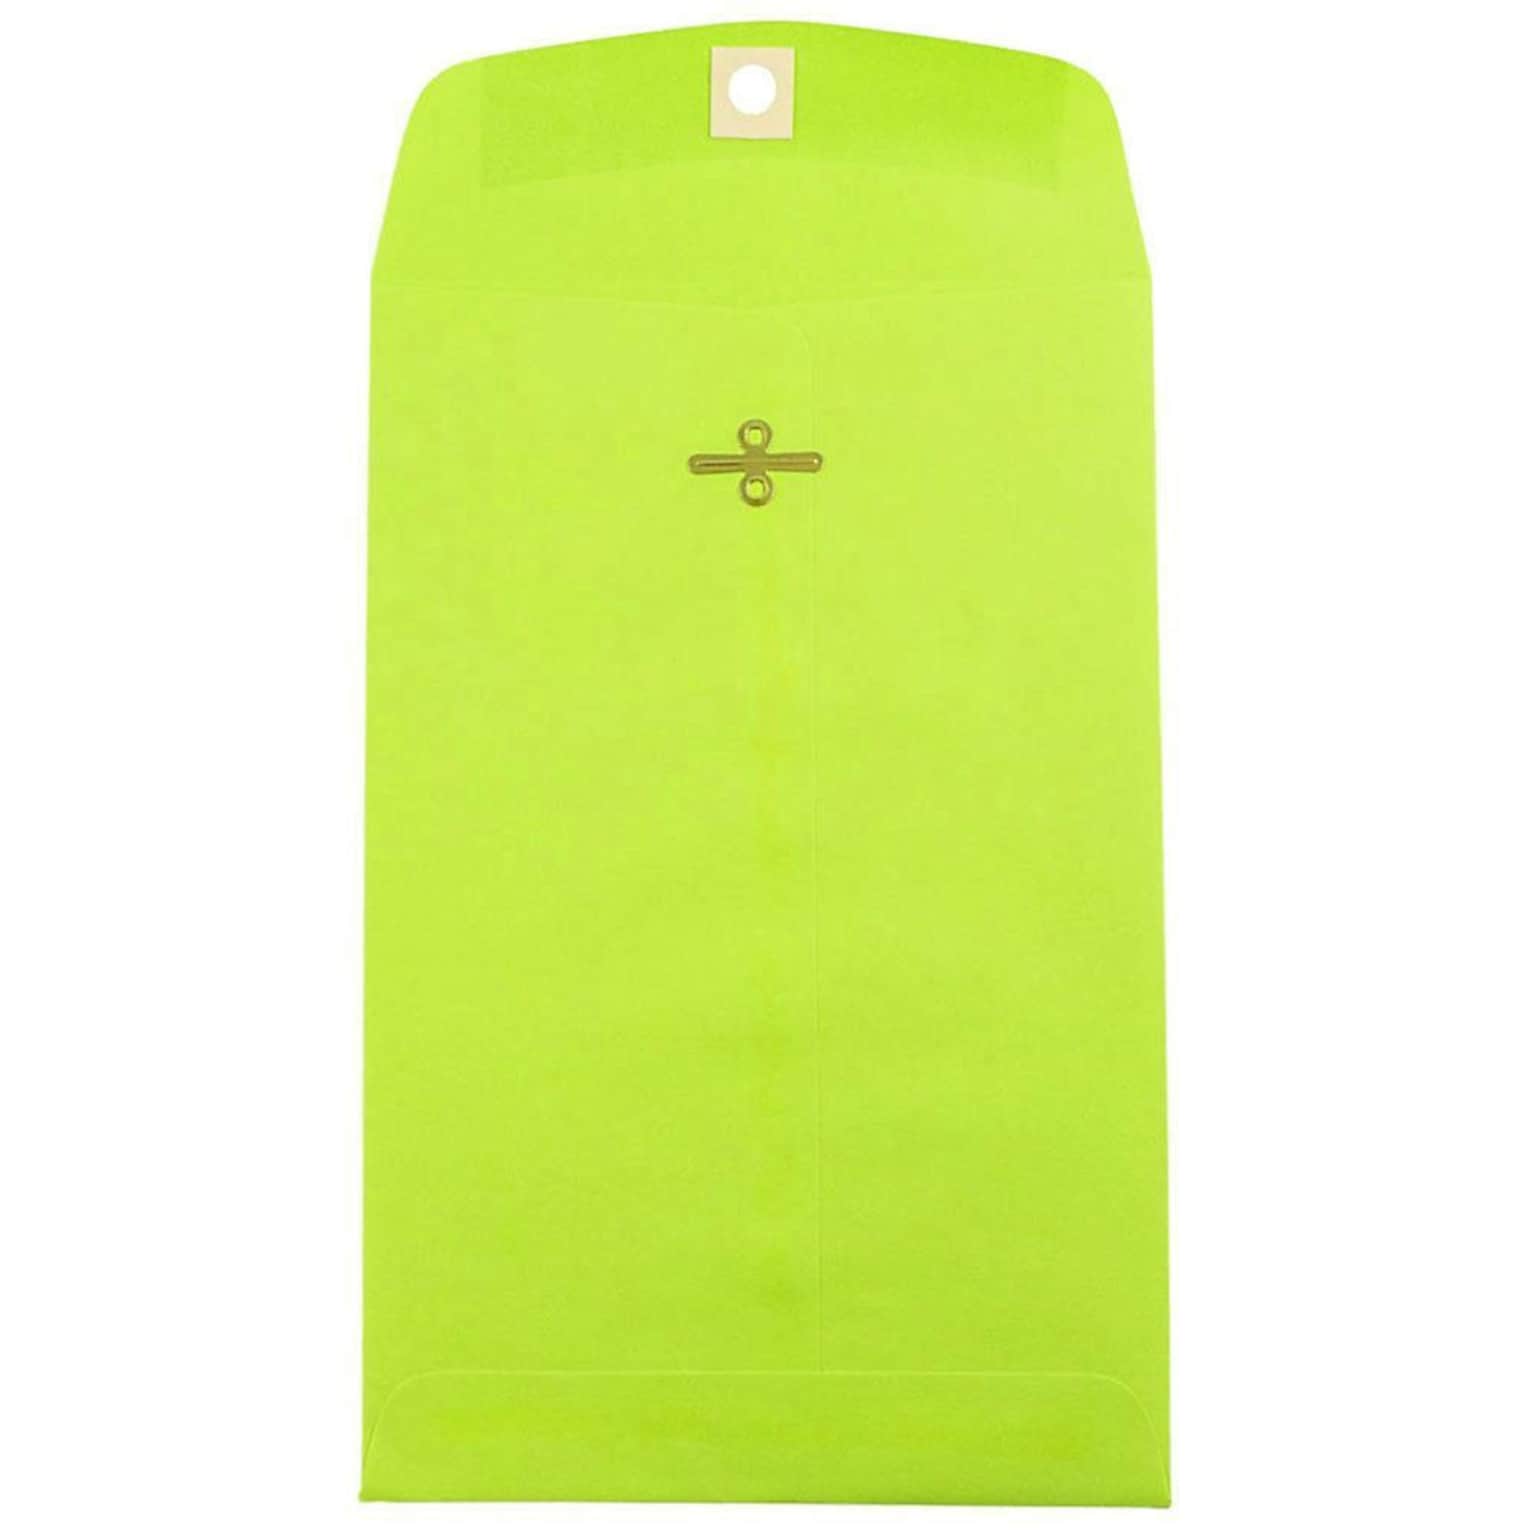 JAM Paper 6 x 9 Open End Catalog Colored Envelopes with Clasp Closure, Ultra Lime Green, 10/Pack (V0128133B)